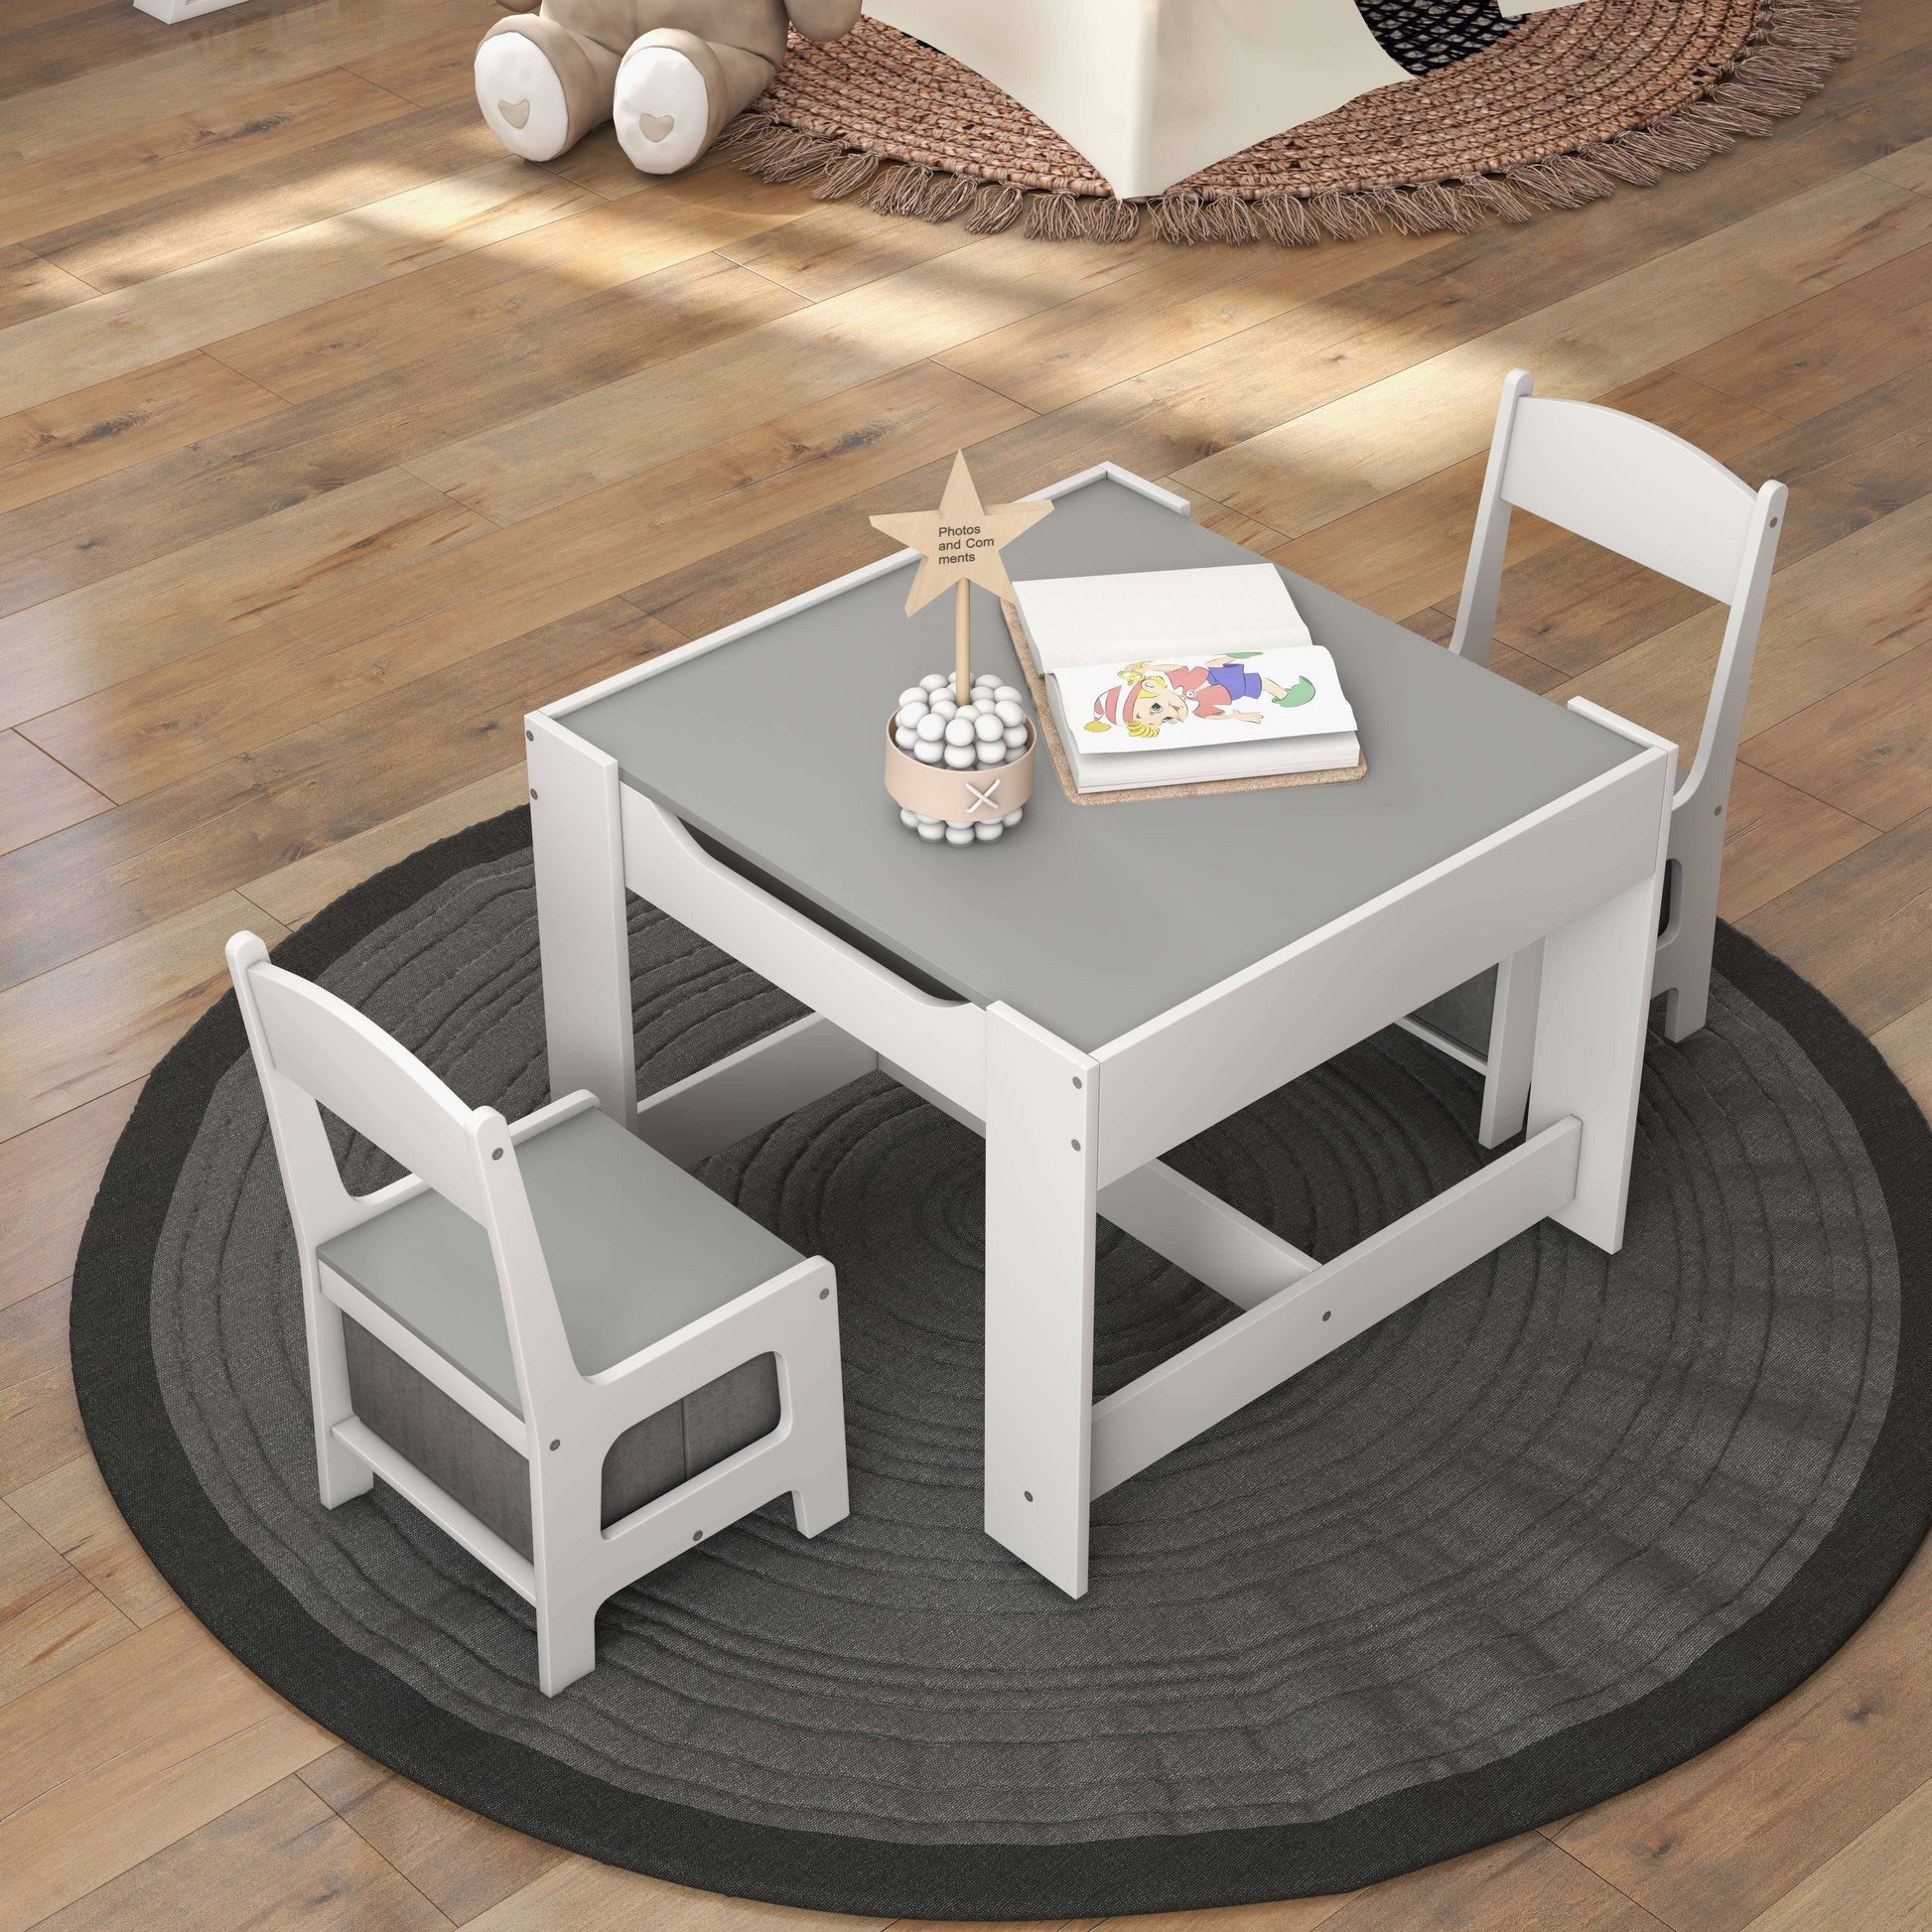 Kids Table Chairs Set With Storage Boxes Blackboard Whiteboard Drawing, White - Gallery Canada